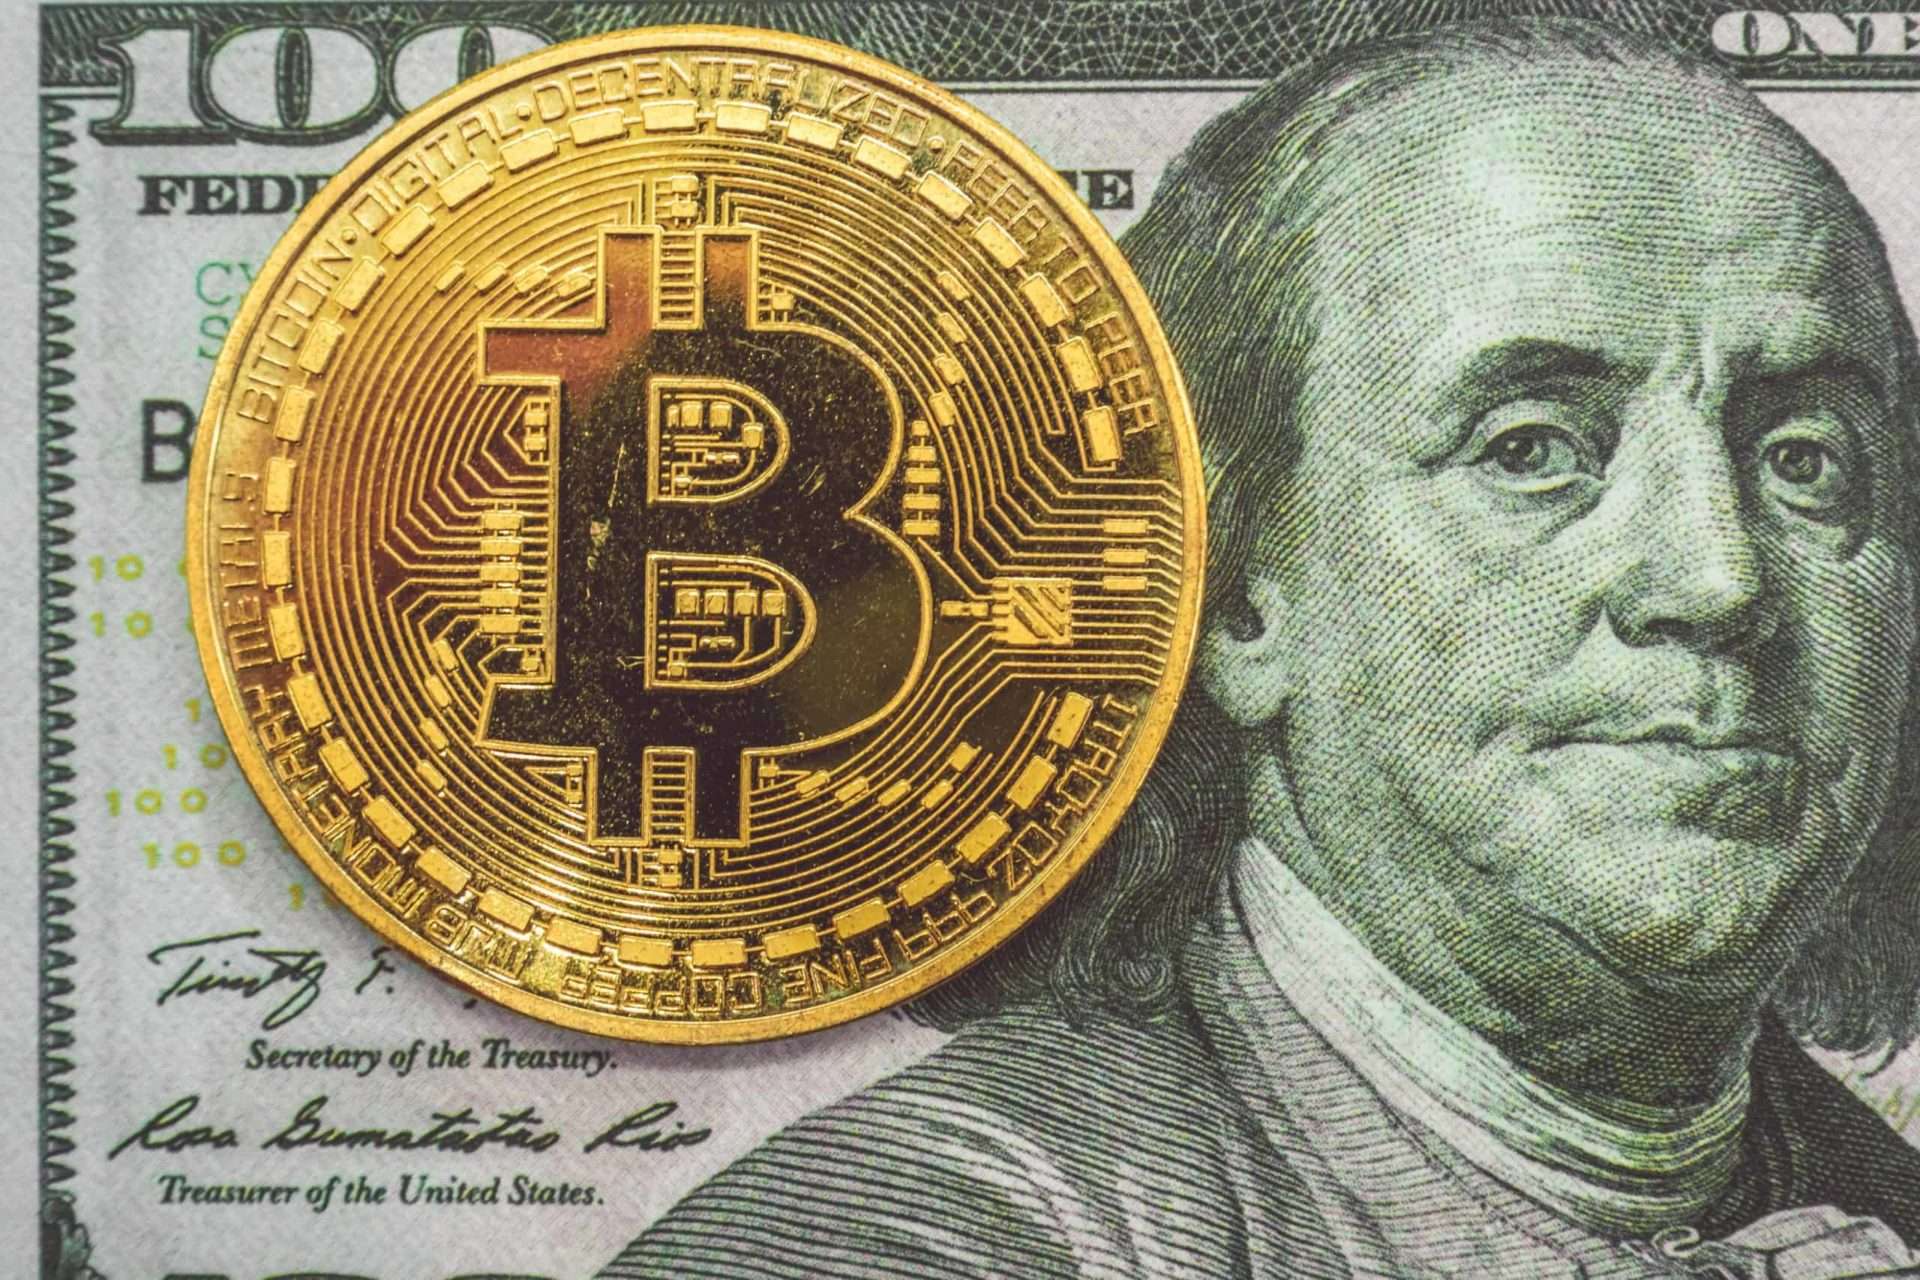 Kevin O’leary on bitcoin: “I’m not convinced yet that [Bitcoin] is a replacement for gold”